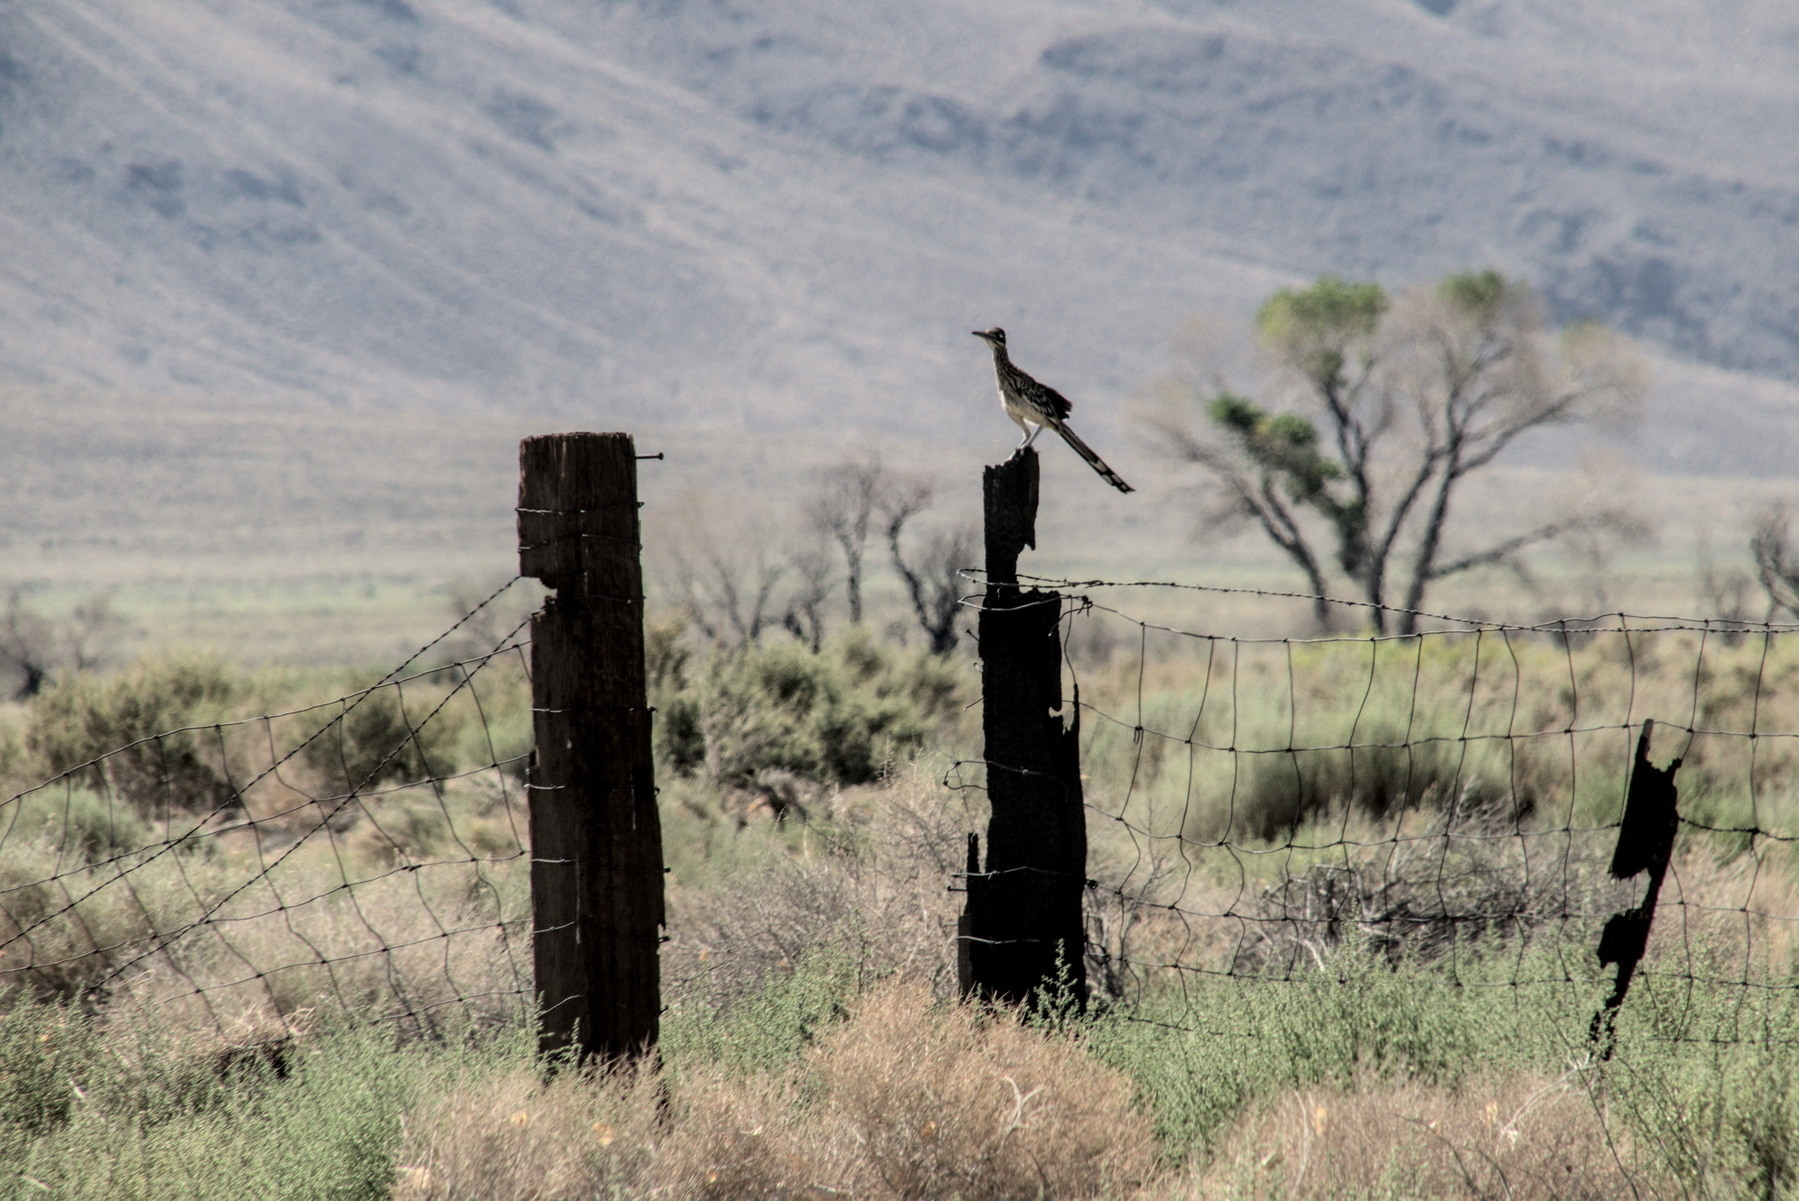 Roadrunner on an old, burned fencepost in the Owens Valley.